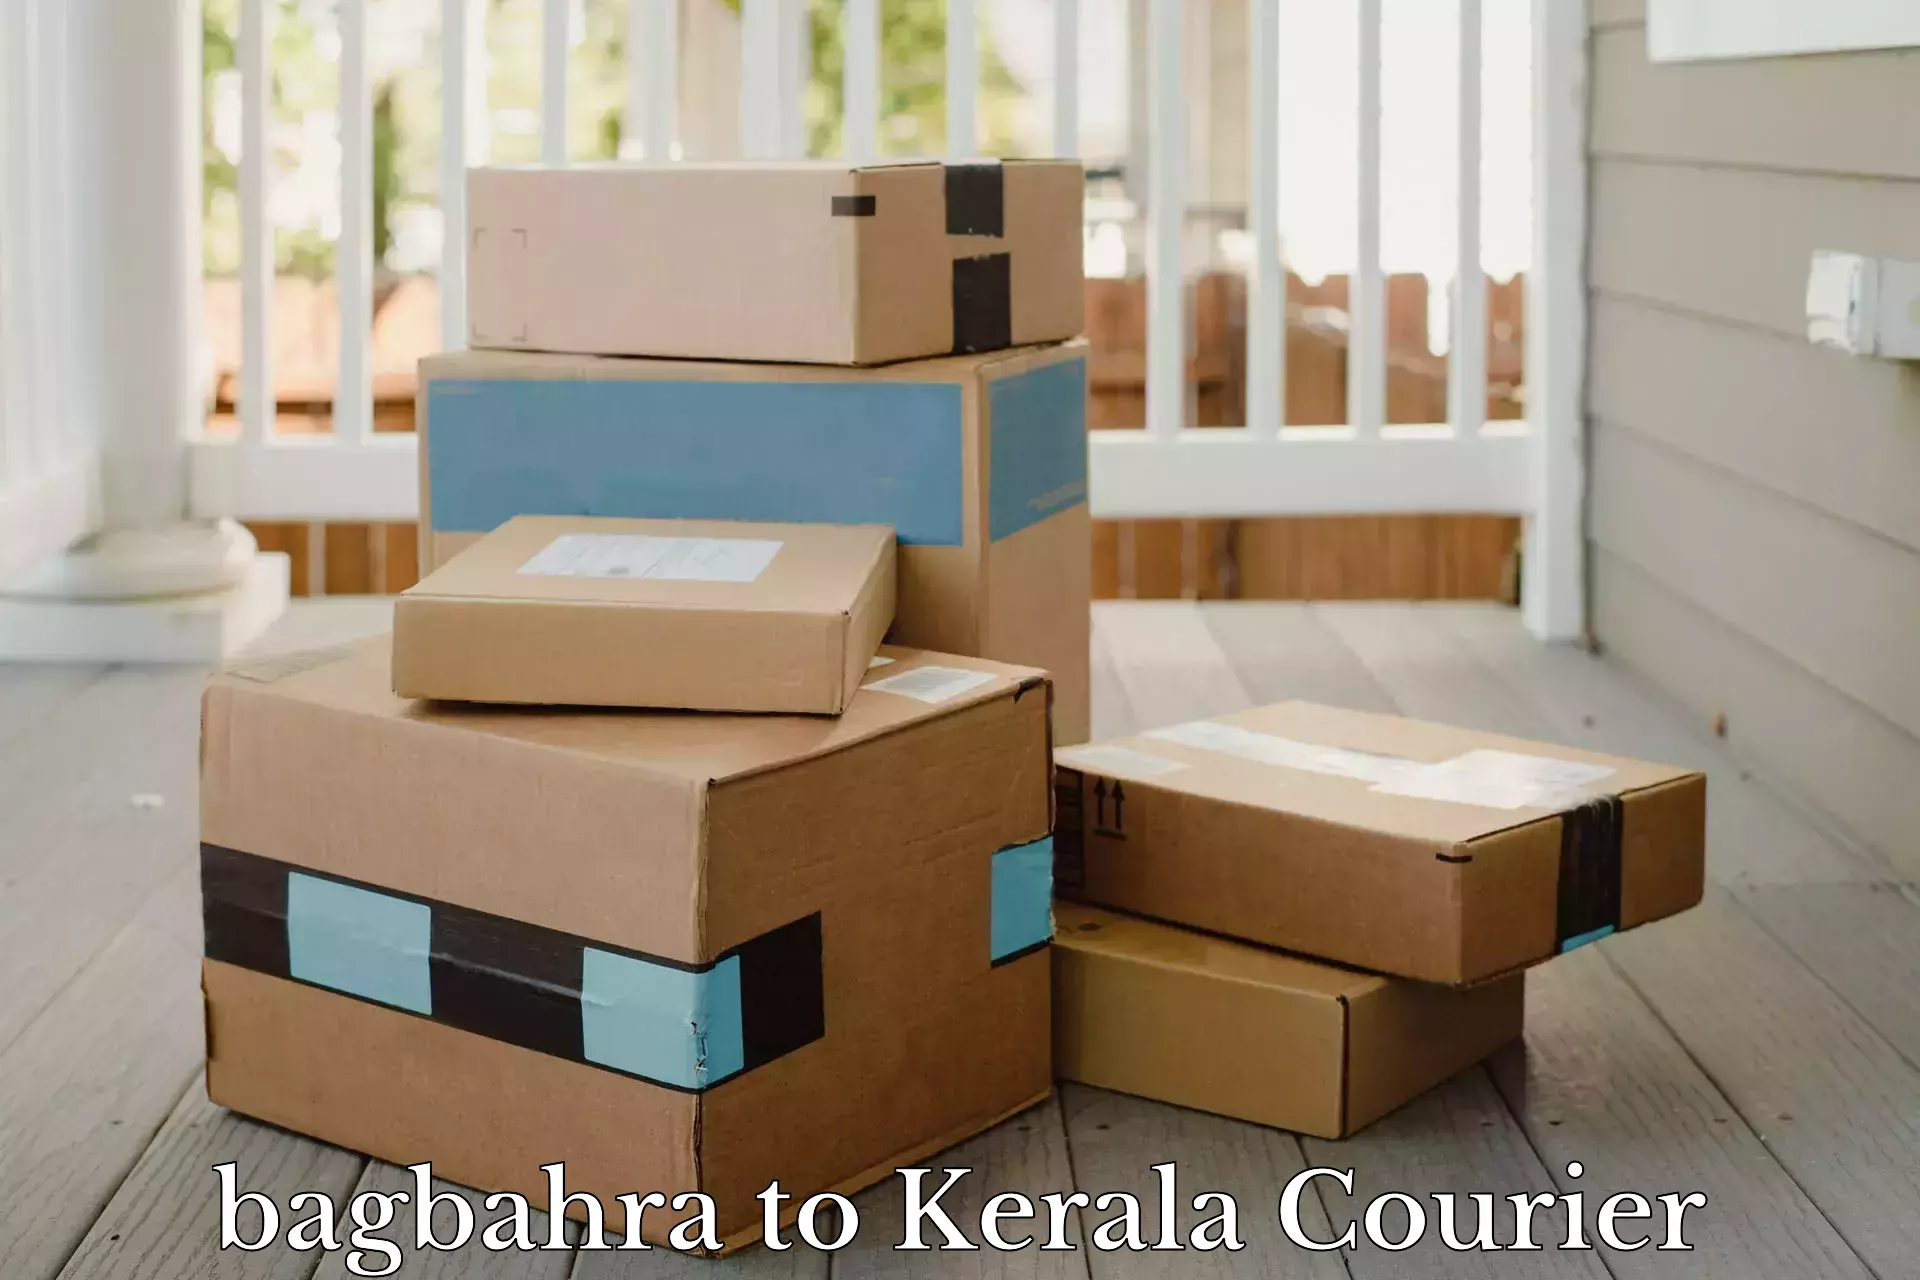 Courier service booking bagbahra to Kanjiramattom